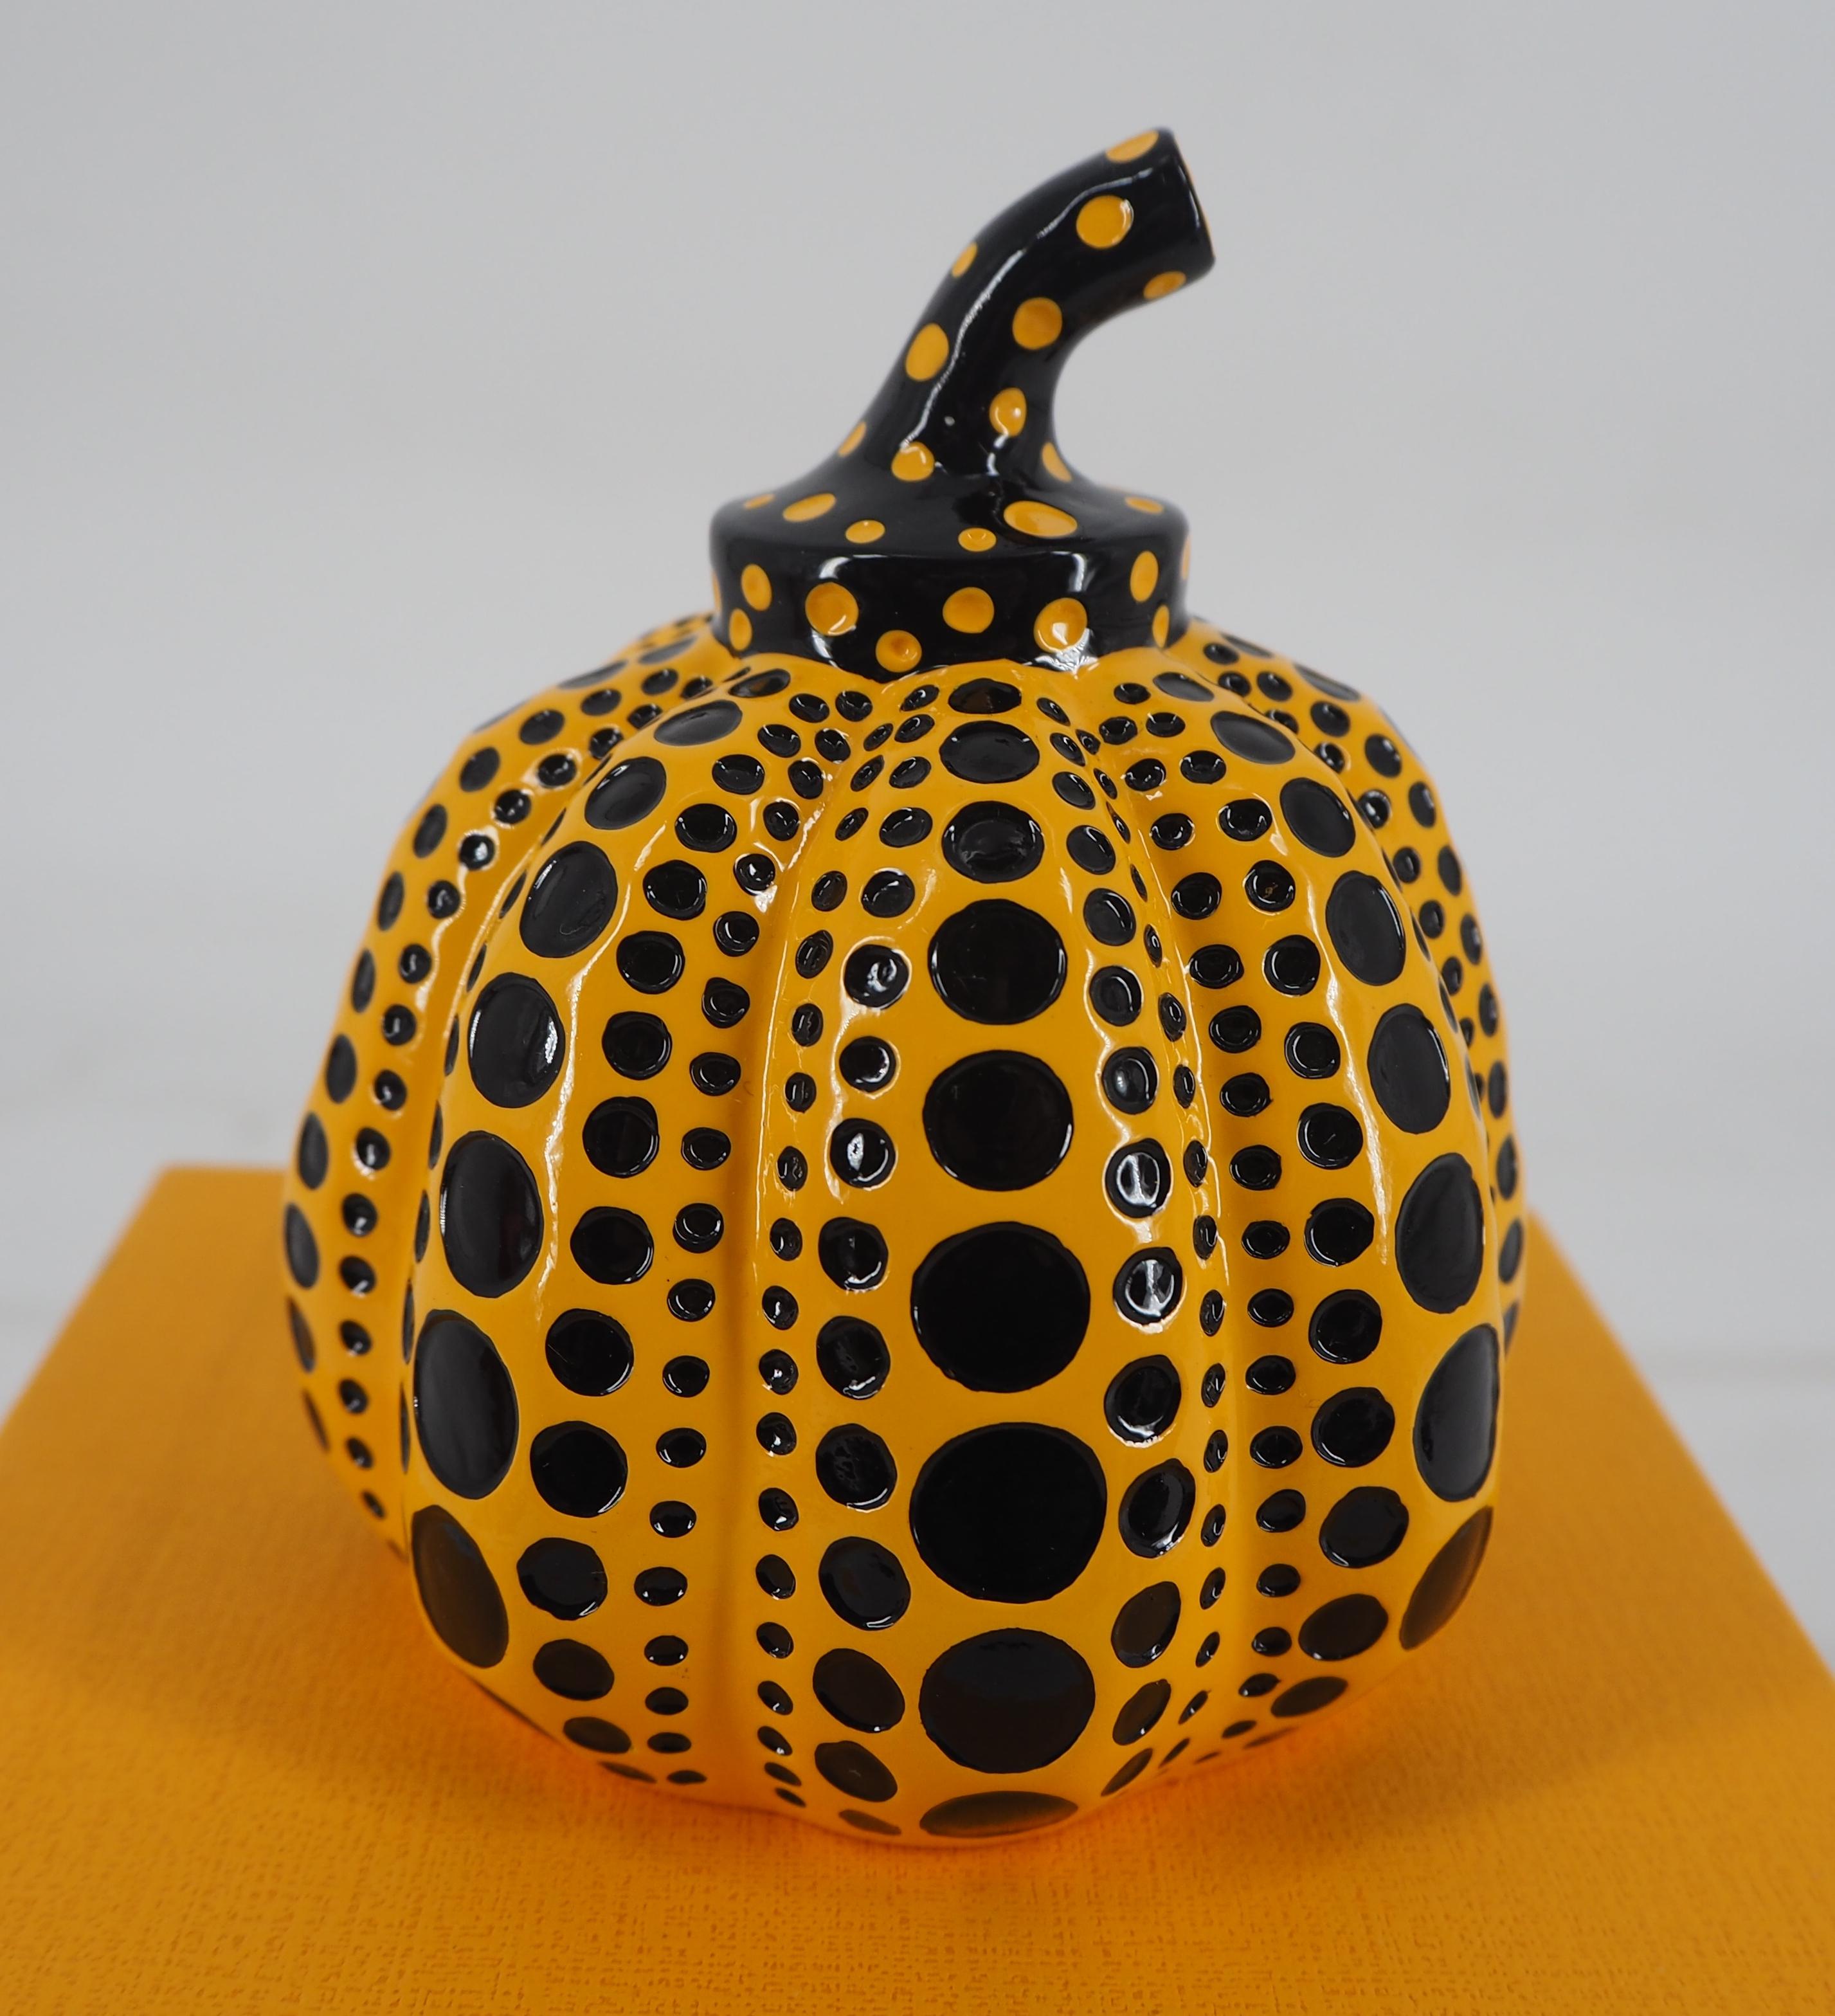 Yayoi Kusama
Pumpkin yellow (Dots Obsession)

Sculpture in lacquer-painted resin, with original box
Stamped with the artist's name '©YAYOI KUSAMA' (on the underside)
Diameter: 8 cm
Height: 10.5 cm
Presented in the original editor case
These works